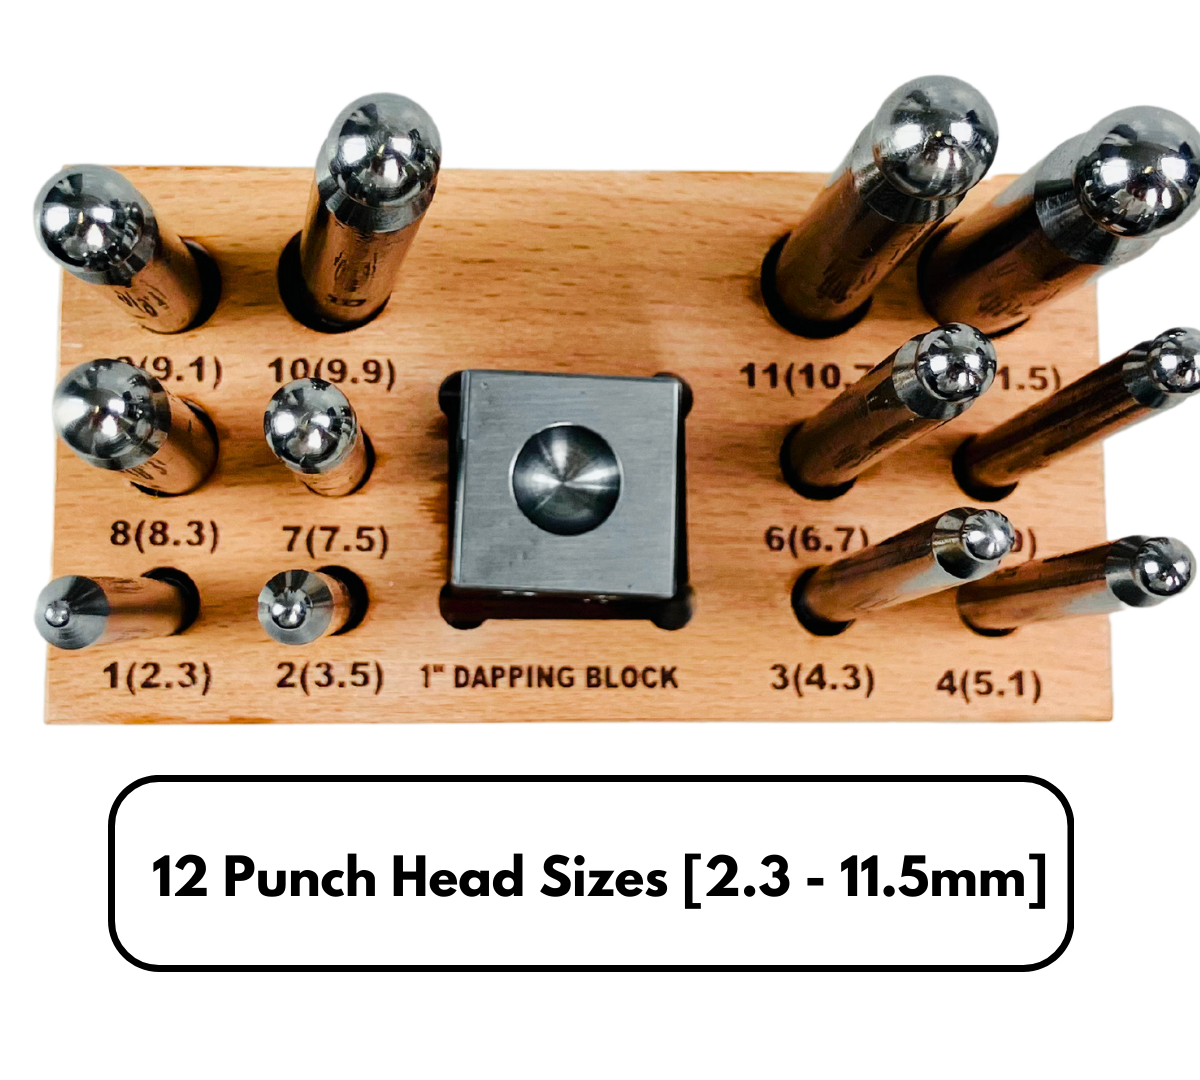 BENCH WIZARD 14 Piece Jewelers Doming Block Dapping Punch Set | Heavy Duty Stainless Steel Construction | Great for Jewelry Making & Metalworking